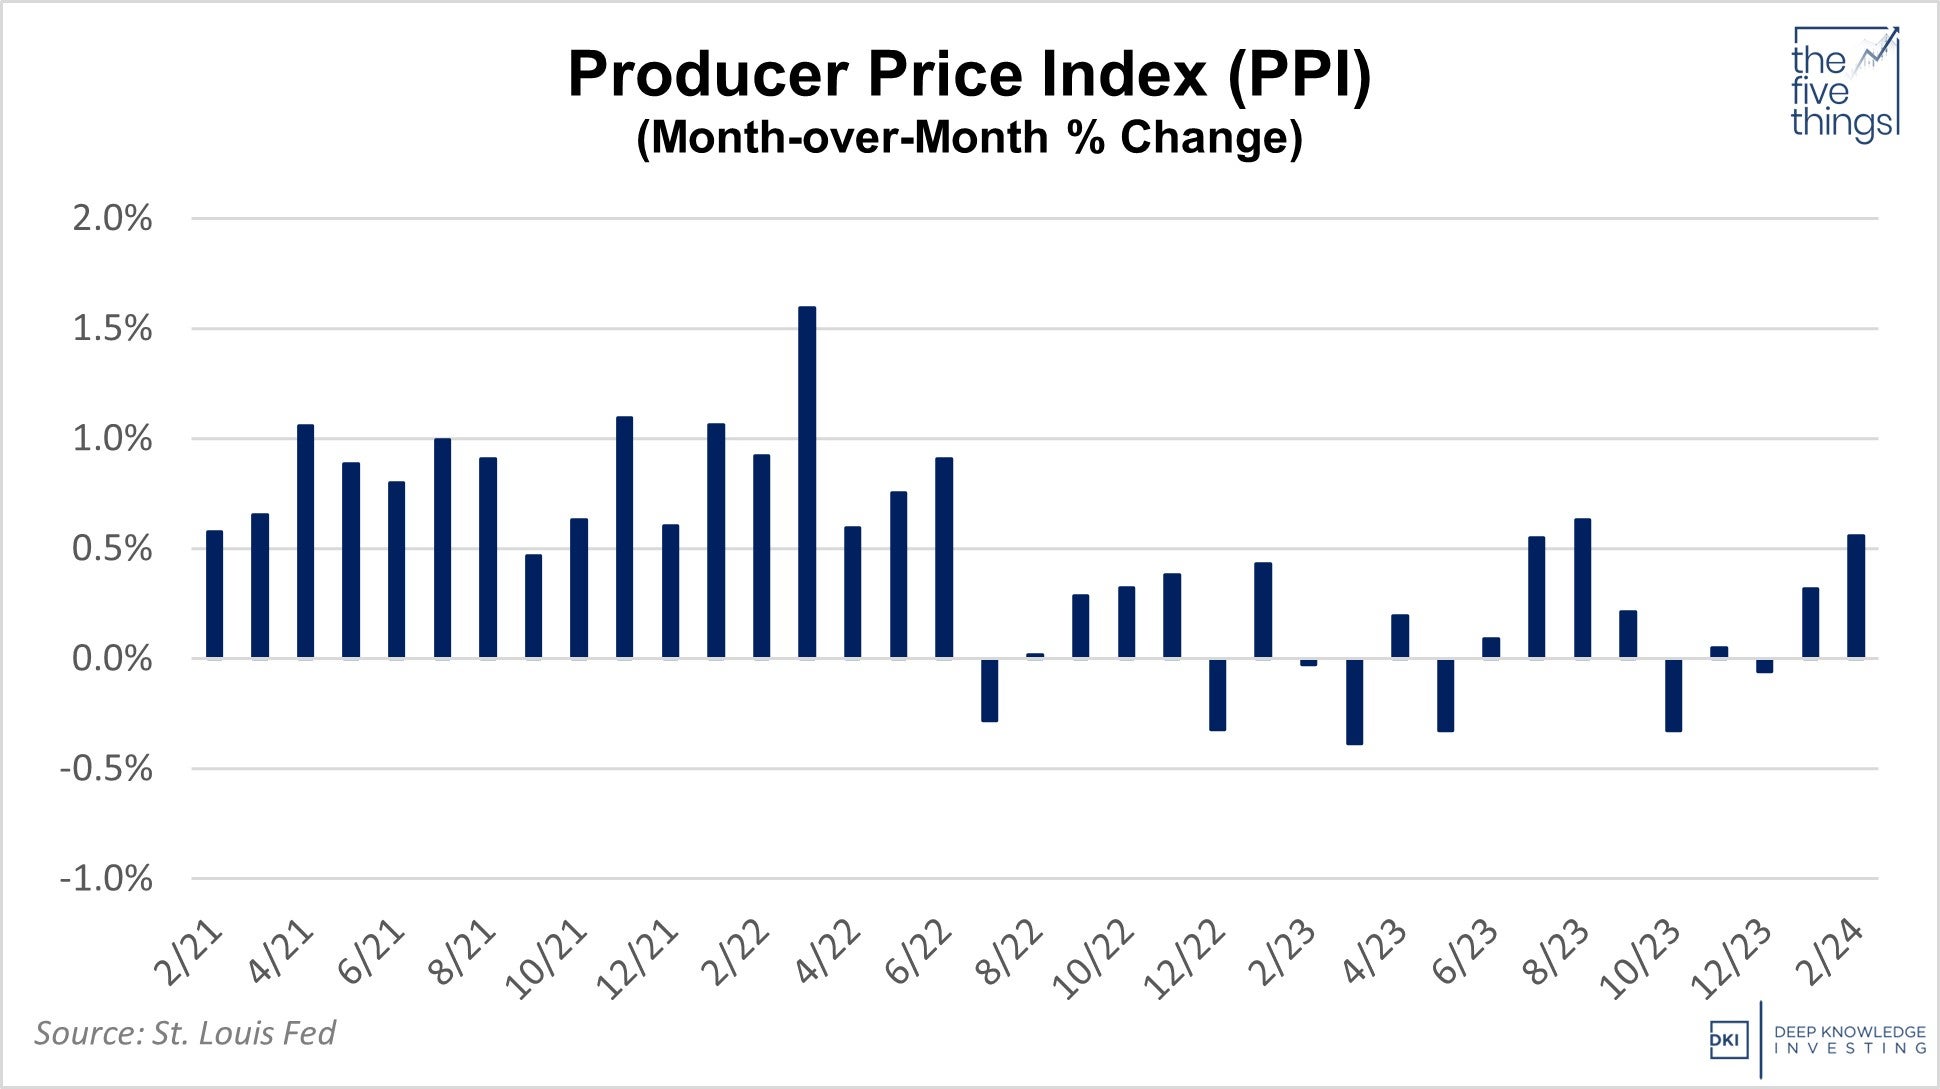 ppi_monthly__change_march_15th.jpg